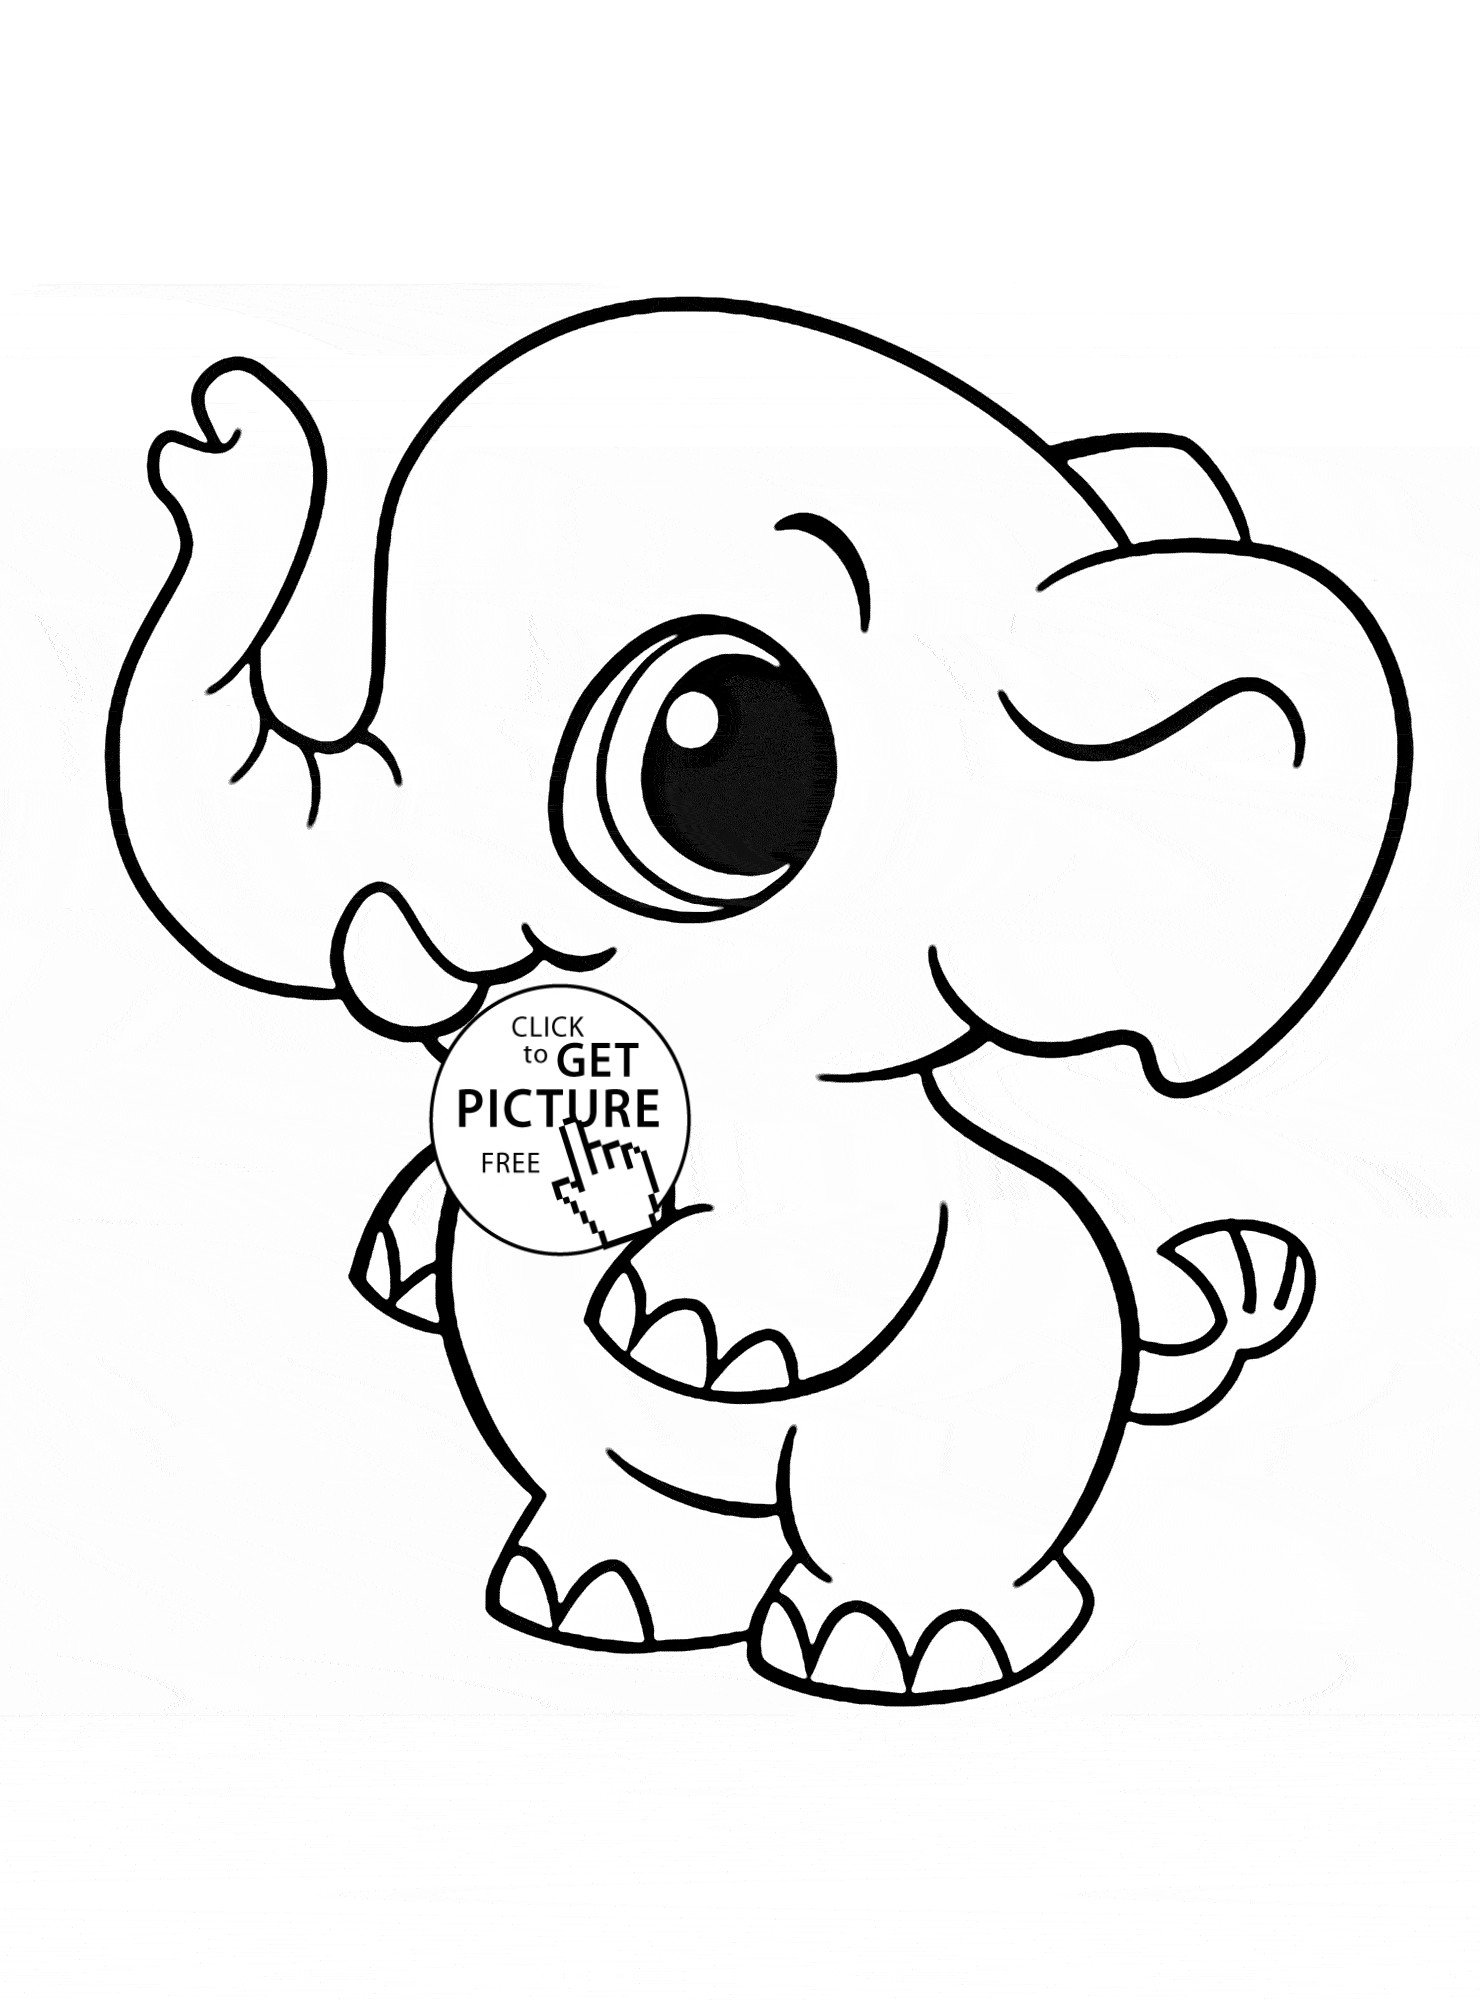 Cute Anime Animals Coloring Pages - BubaKids.com